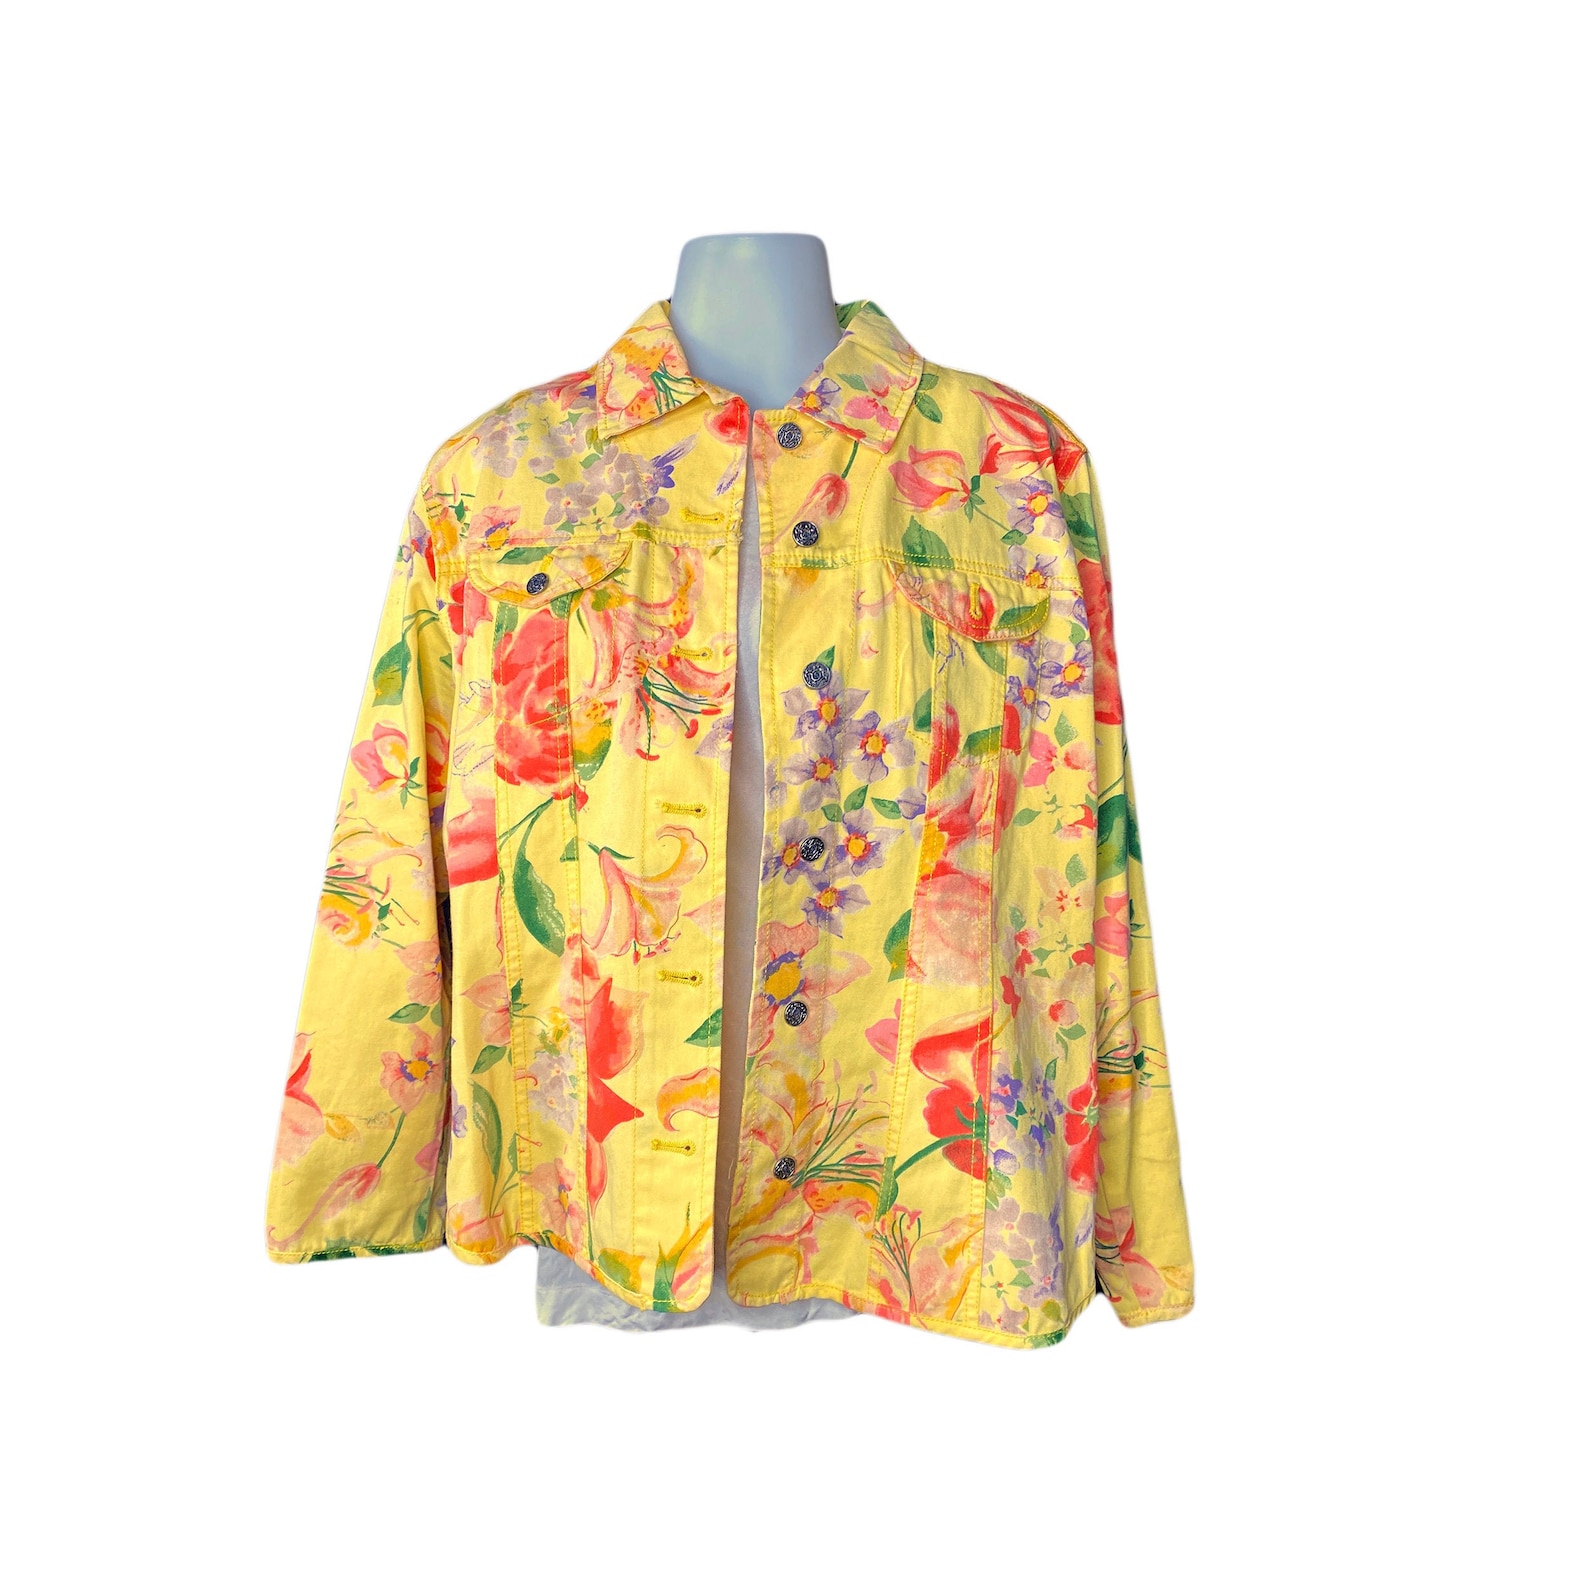 Vintage Chico's Yellow Floral Print Lightweight Jacket, 12 - Etsy